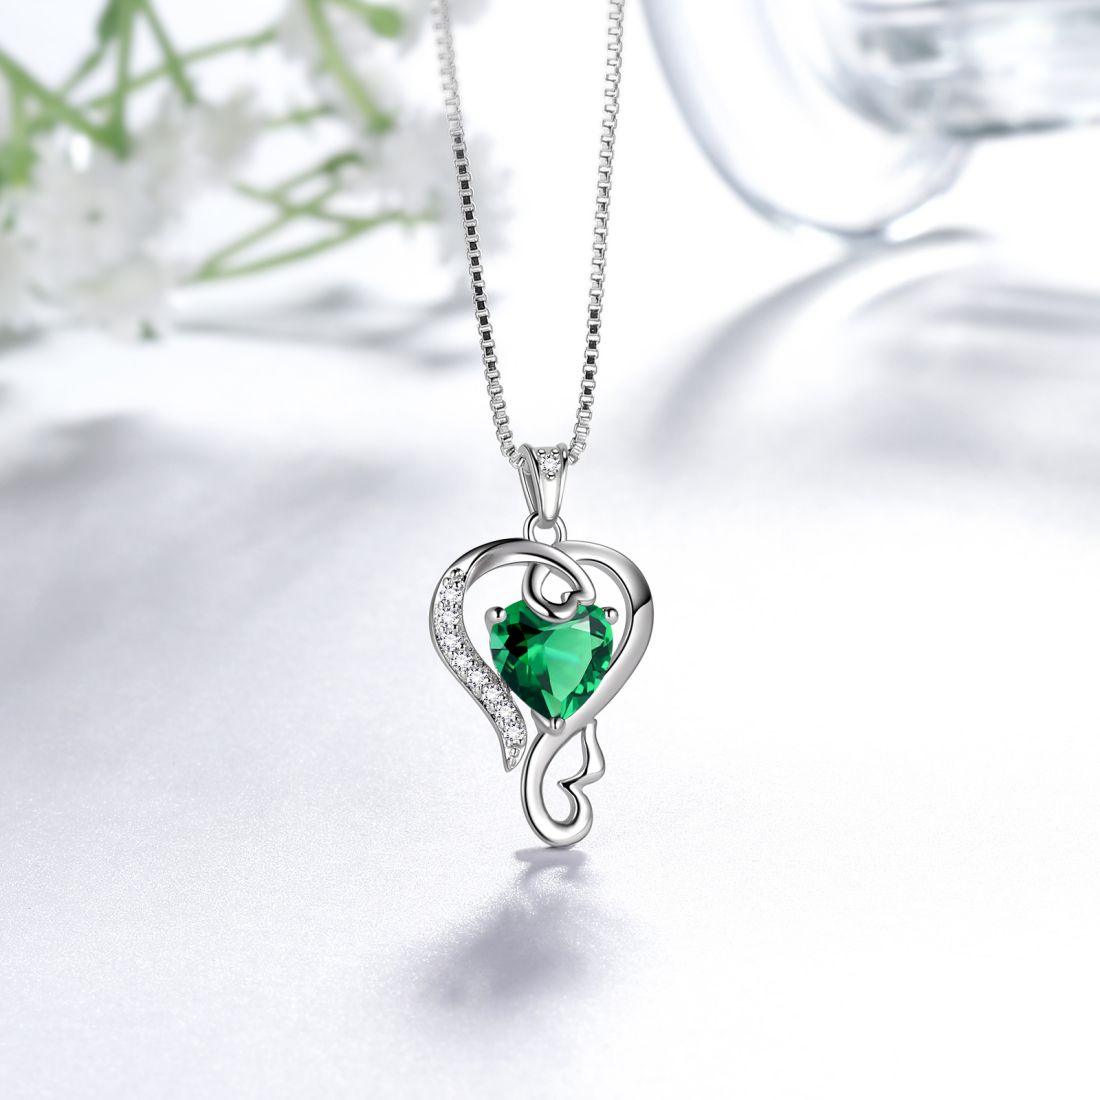 Birthstone Necklaces Love Heart Pendant 925 Sterling Silver - Necklaces - Aurora Tears Jewelry